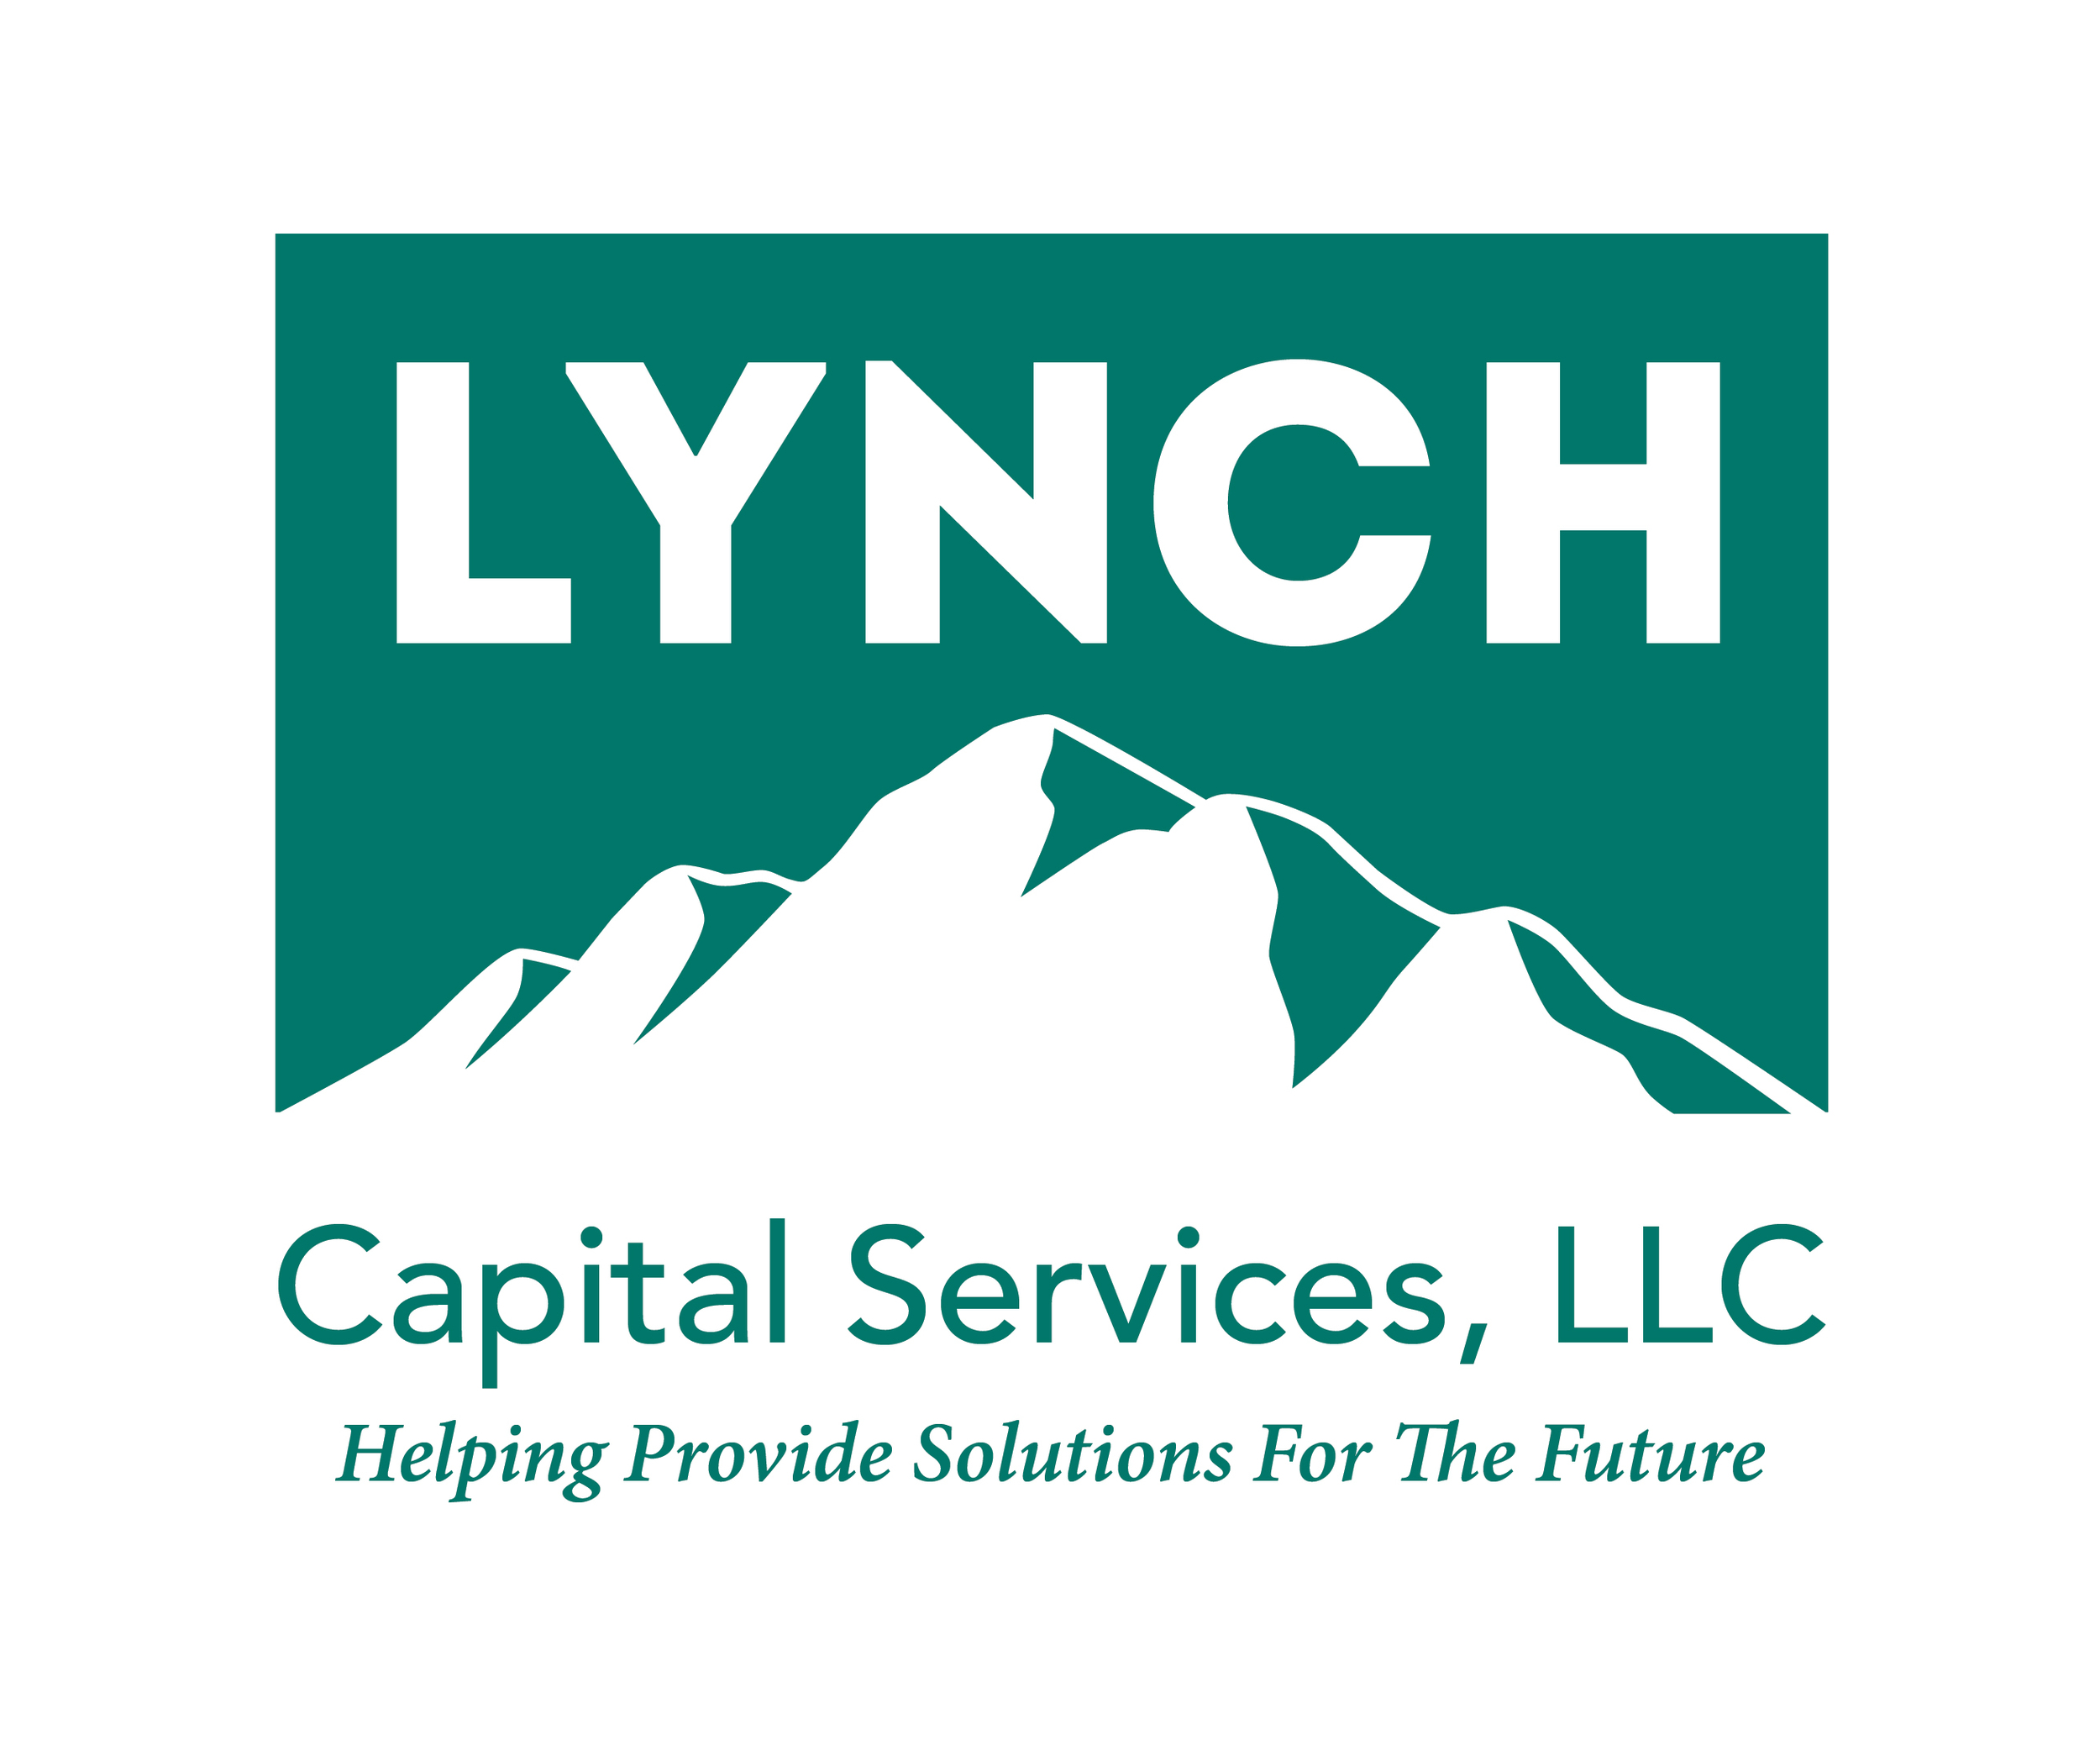 Lynch Capital Services